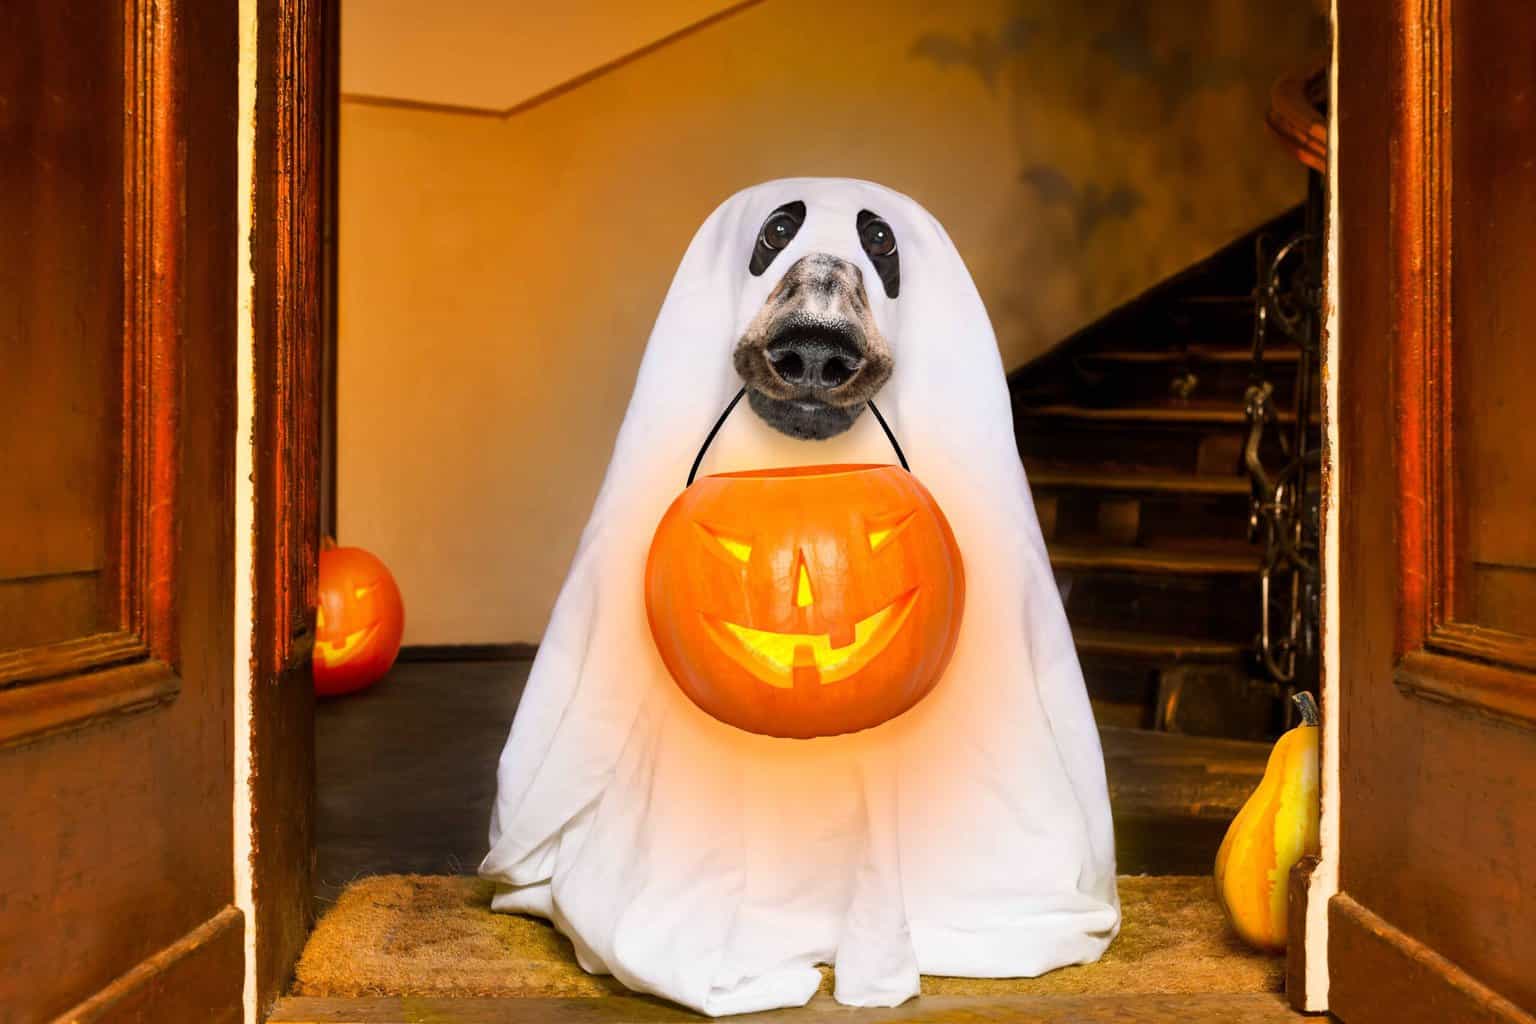 Dog wears ghost costume and holds trick-or-treat pumpkin. Dog Halloween dangers: Costumed trick-or-treaters can frighten dogs and cause them to run away. Keep your dog's identification up to date.